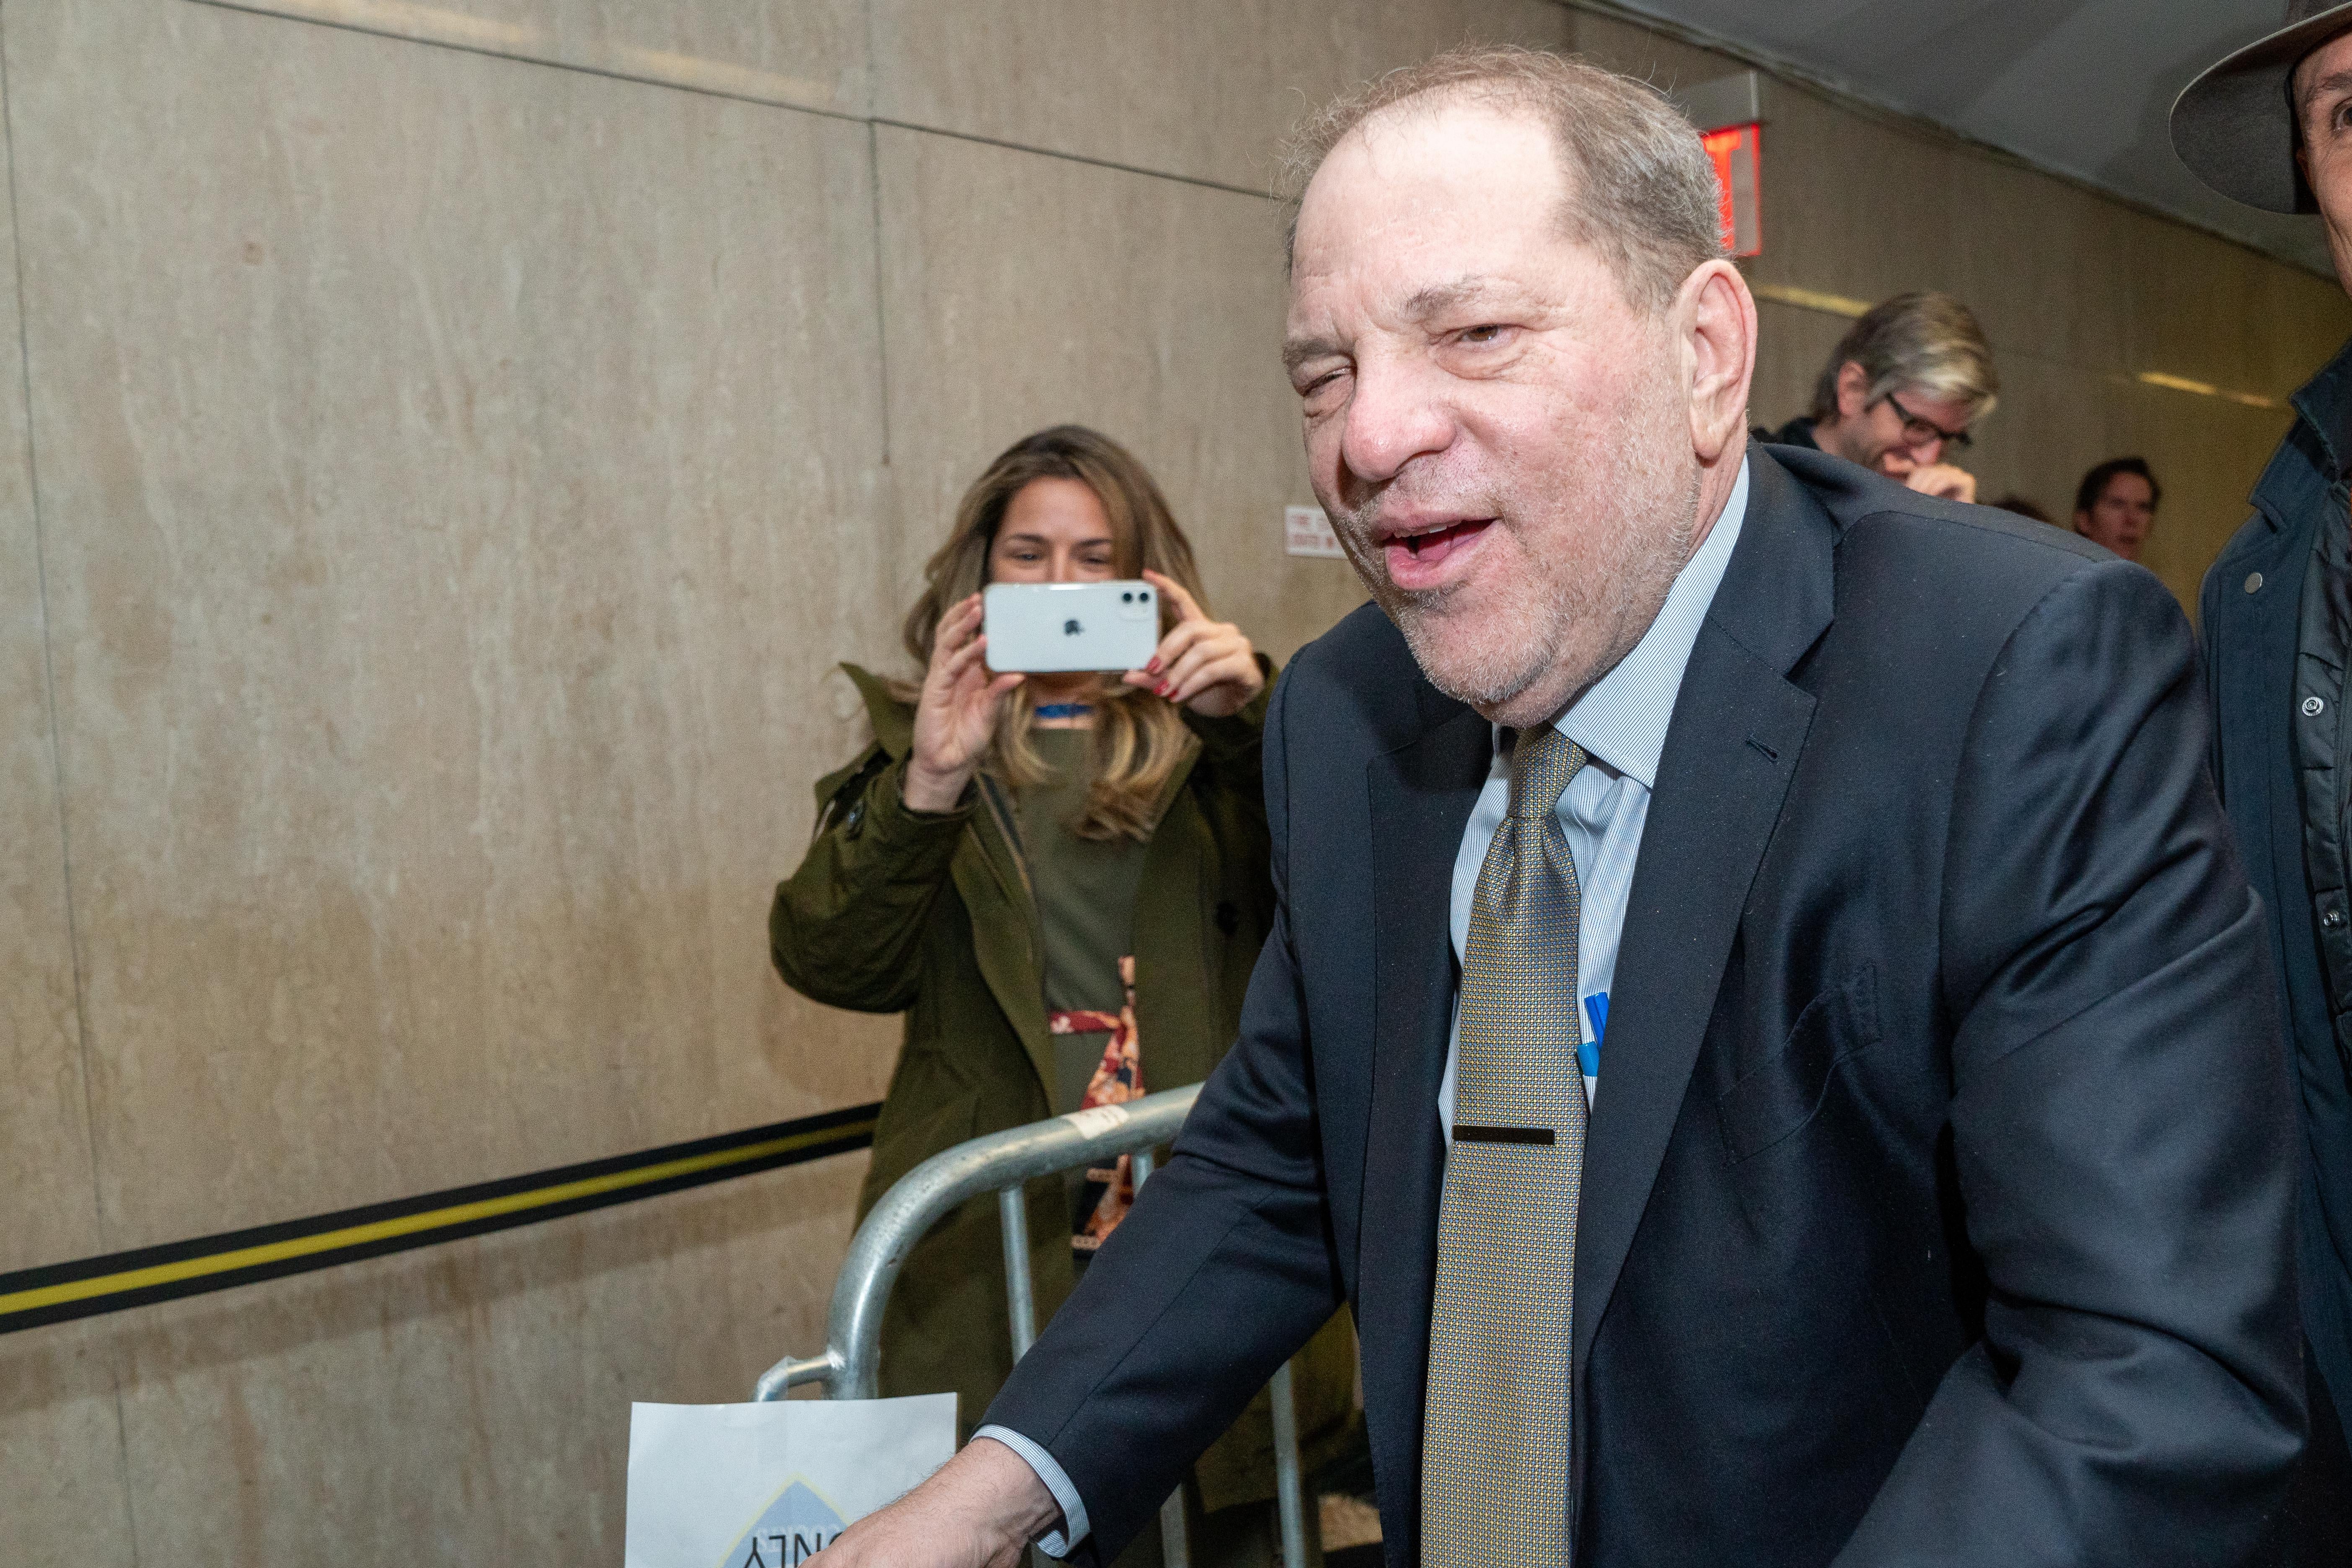 NEW YORK, NY - JANUARY 30: Film producer Harvey Weinstein departs his sexual assault trial at Manhattan Criminal Court on January 30, 2020 in New York City. Weinstein has pleaded not-guilty to five counts of rape and sexual assault against two unnamed women and faces a possible life sentence in prison. His trial opened January 6, and could last until early March. (Photo by David Dee Delgado/Getty Images)